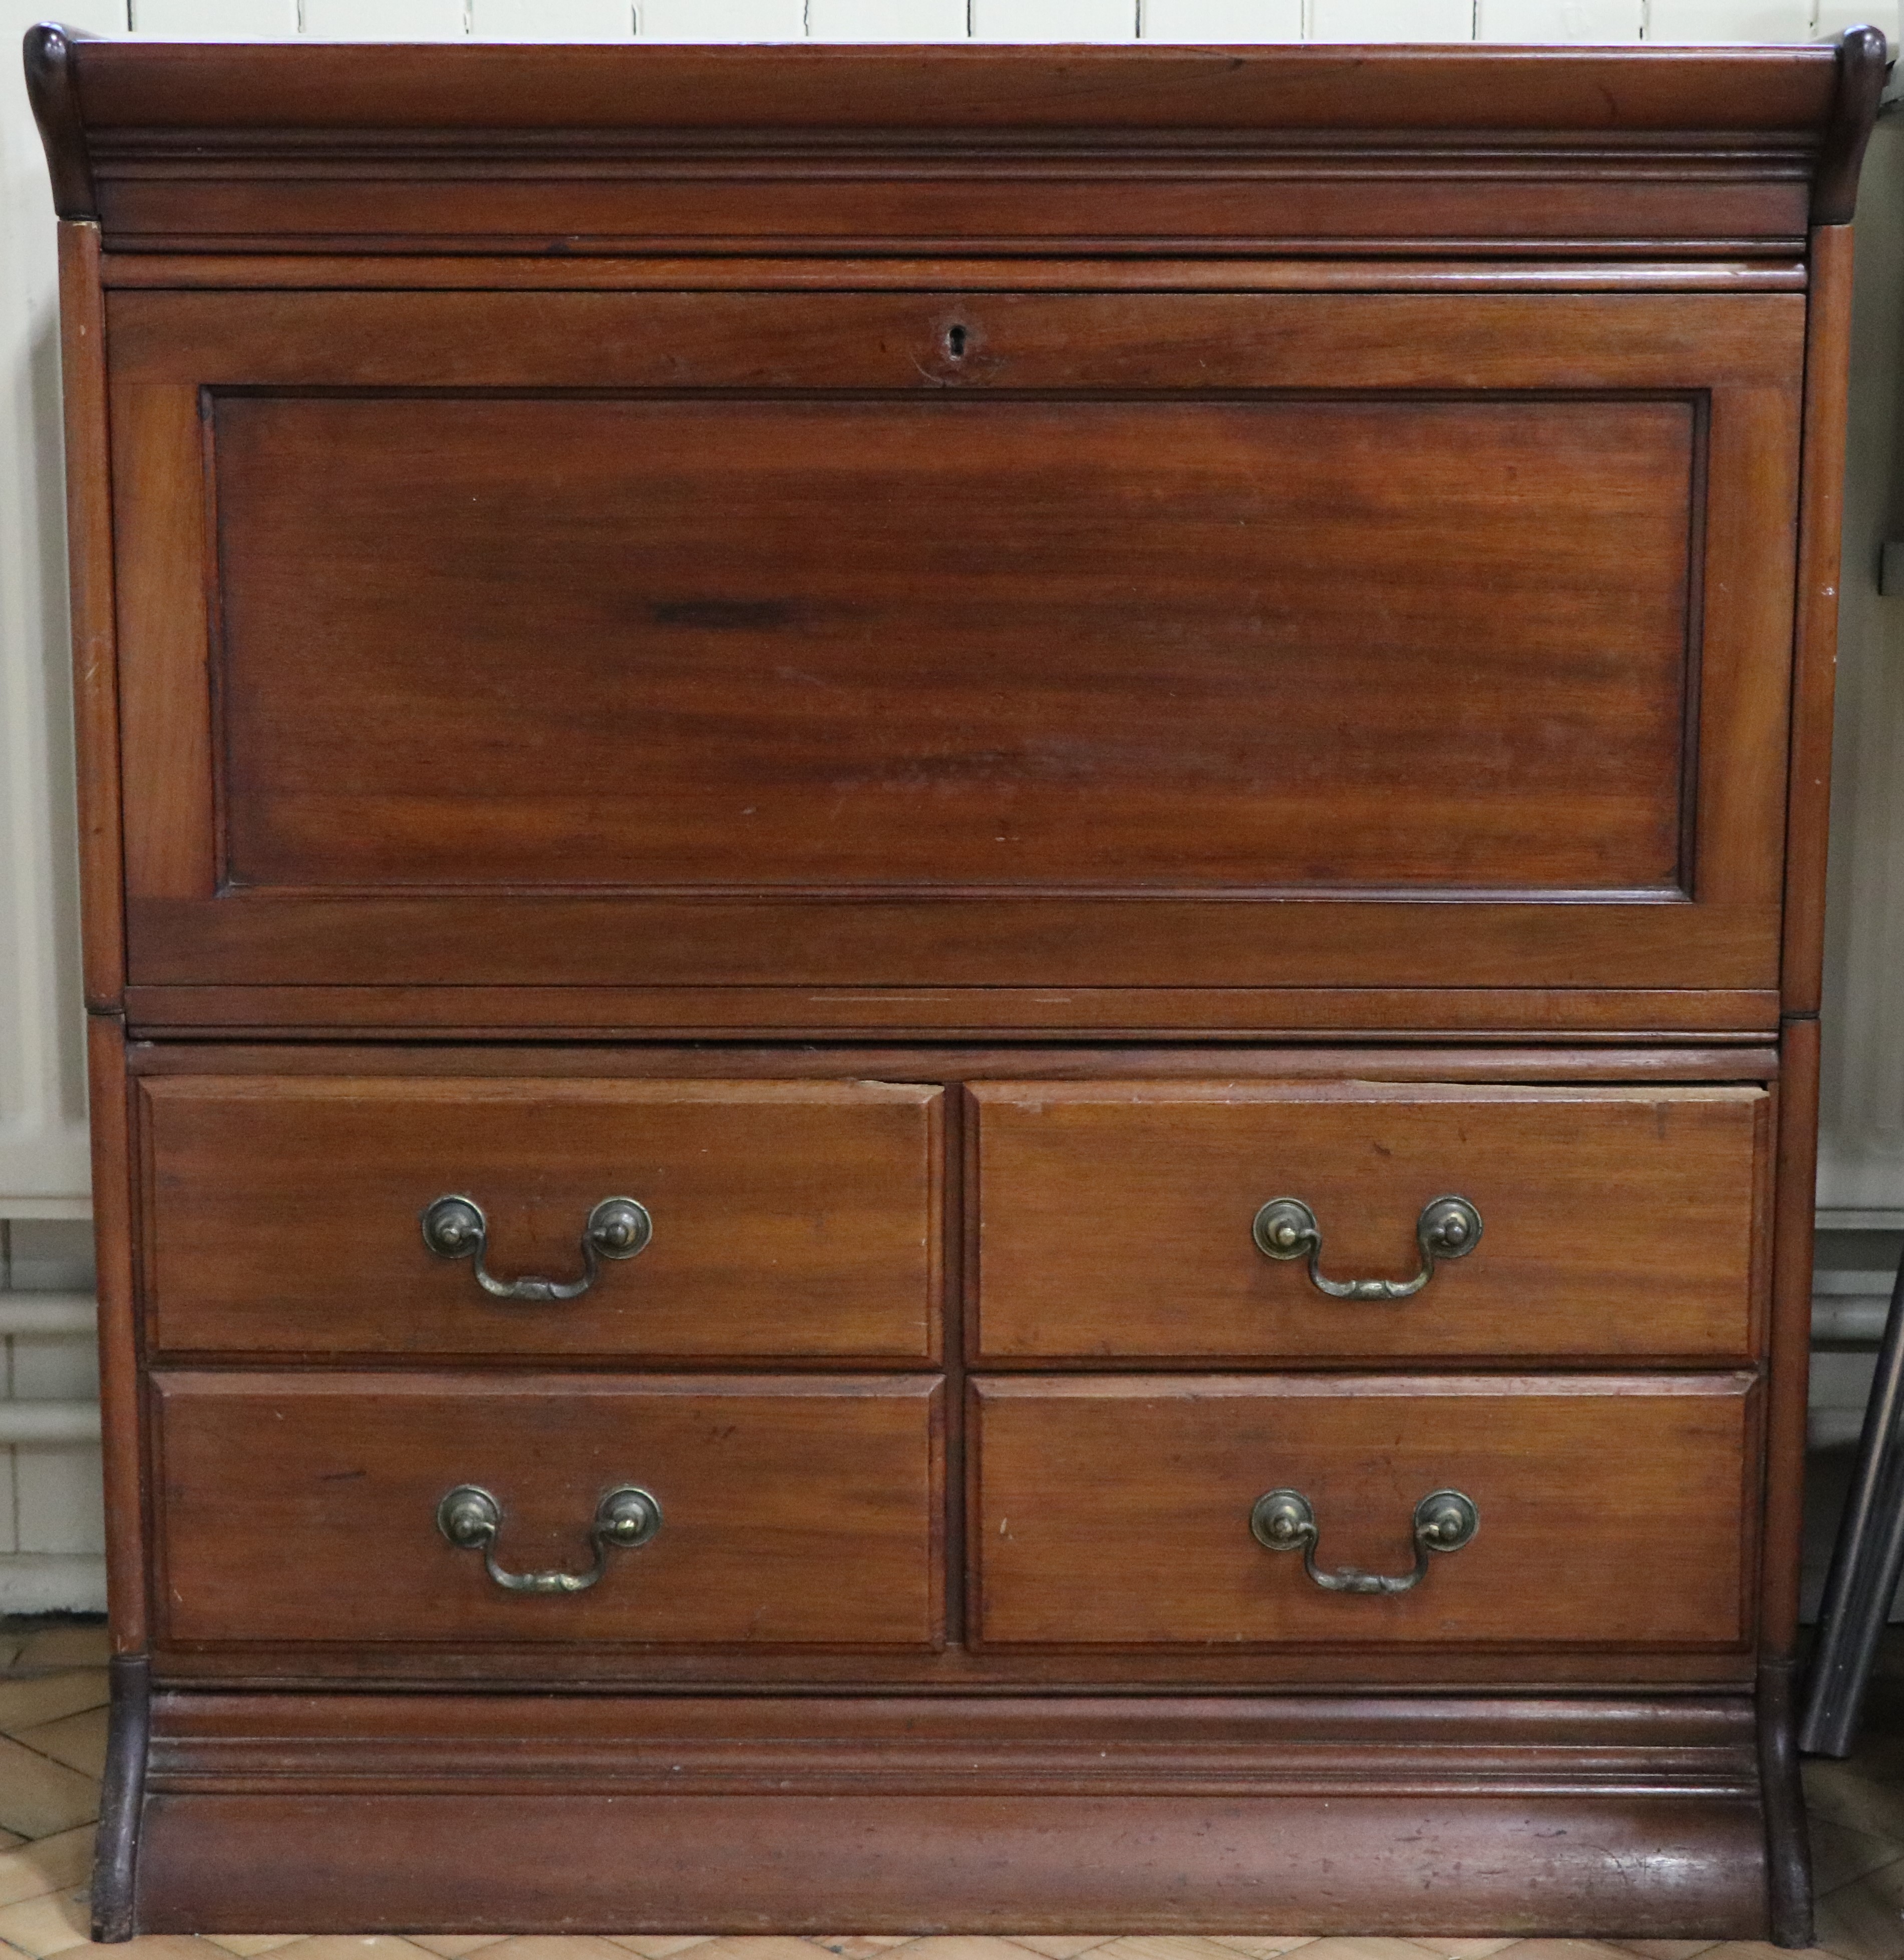 A 1920s Globe-Wernicke mahogany sectional pediment, fall-front bureau stage, drawers and base